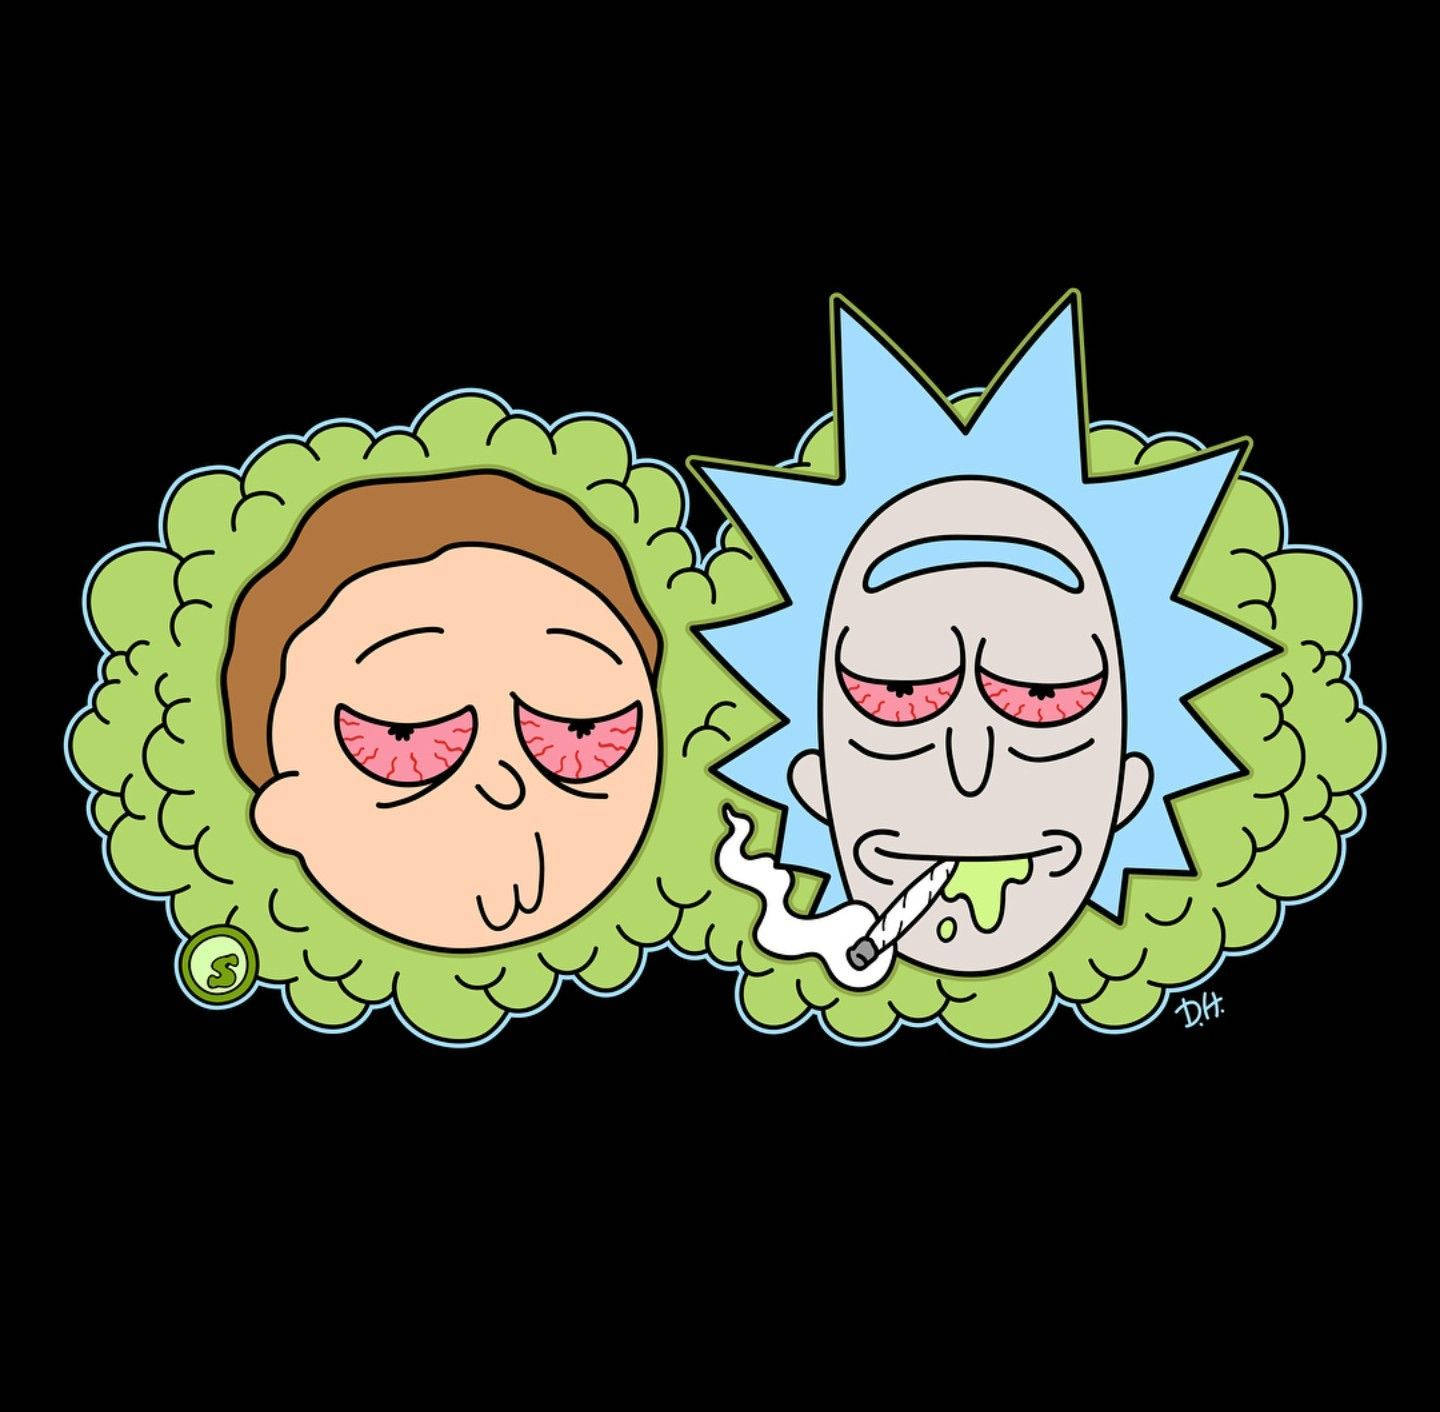 Free Rick And Morty Wallpaper Downloads, [400+] Rick And Morty Wallpapers  for FREE 